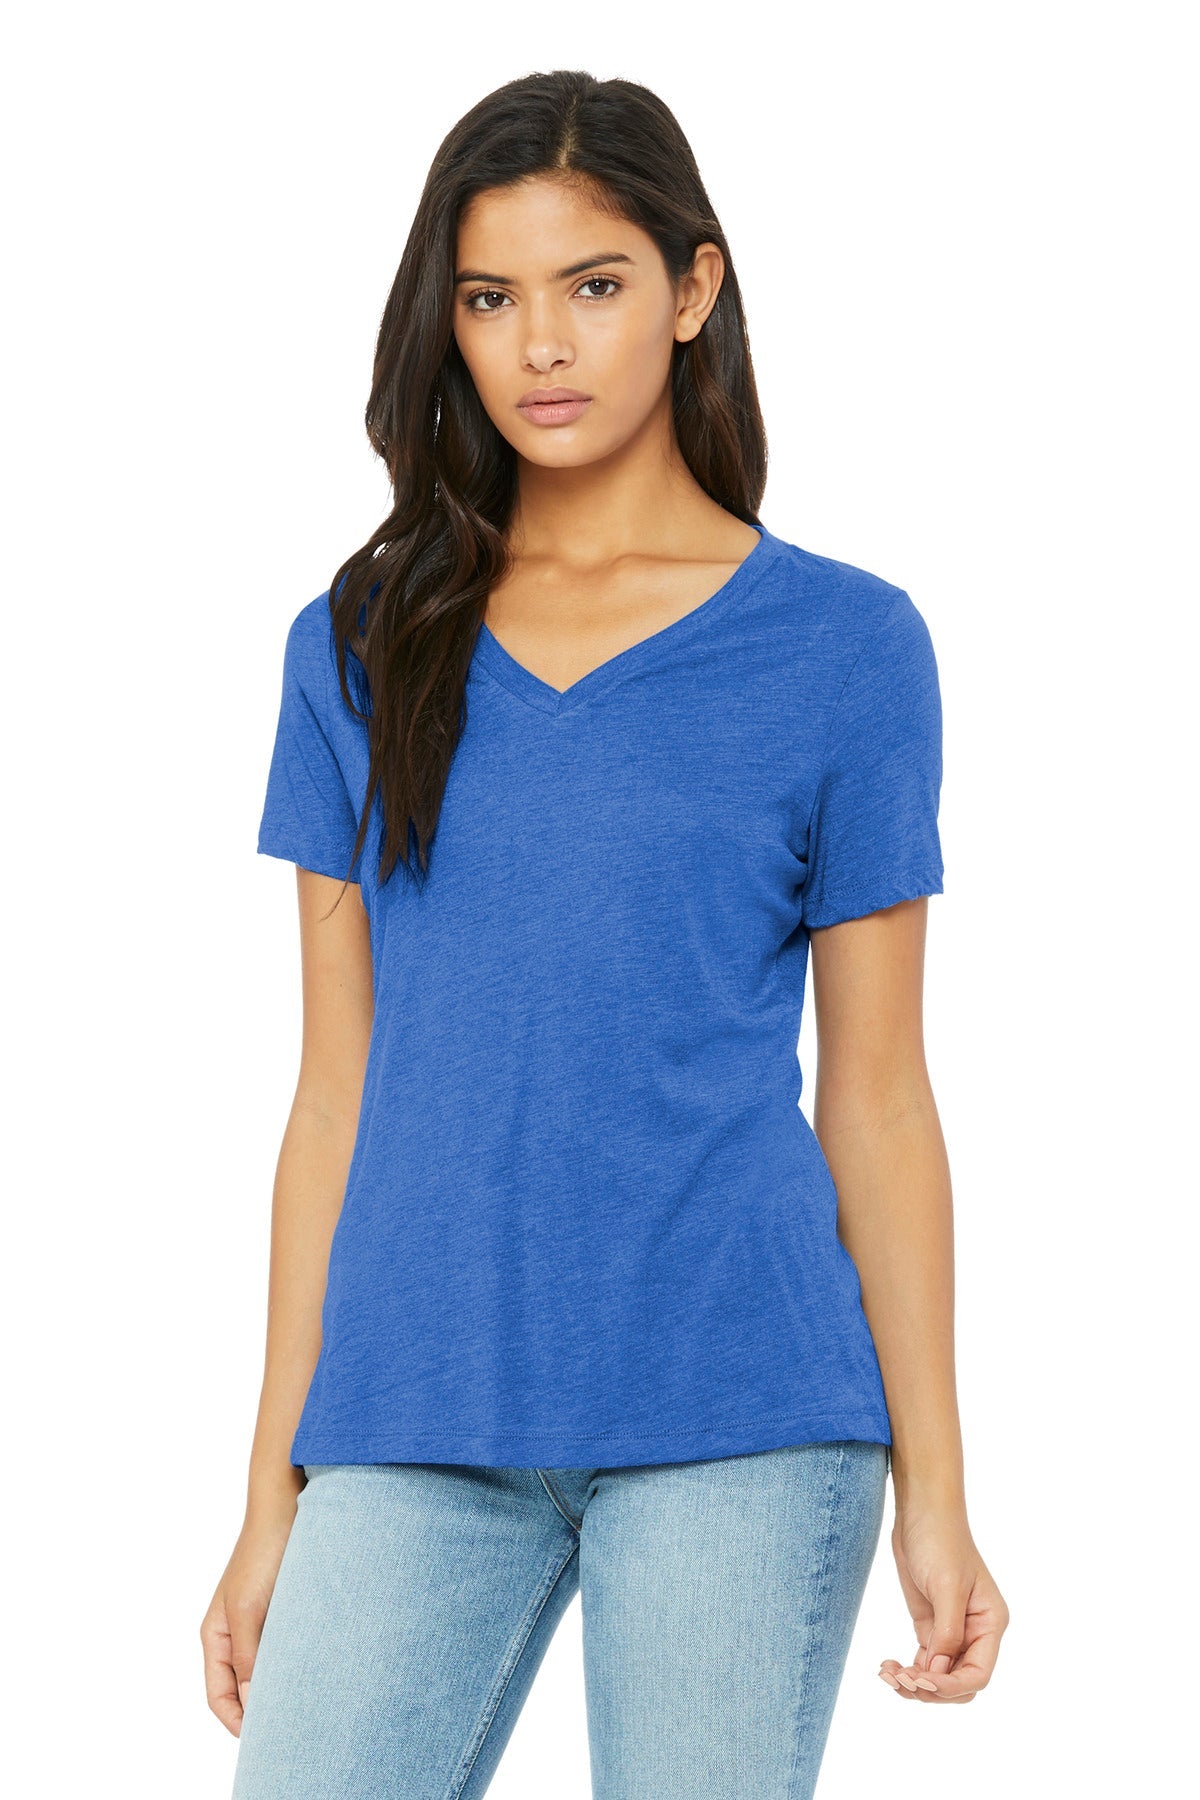 BELLA+CANVAS® Women's Relaxed Triblend V-Neck Tee BC6415 - DFW Impression